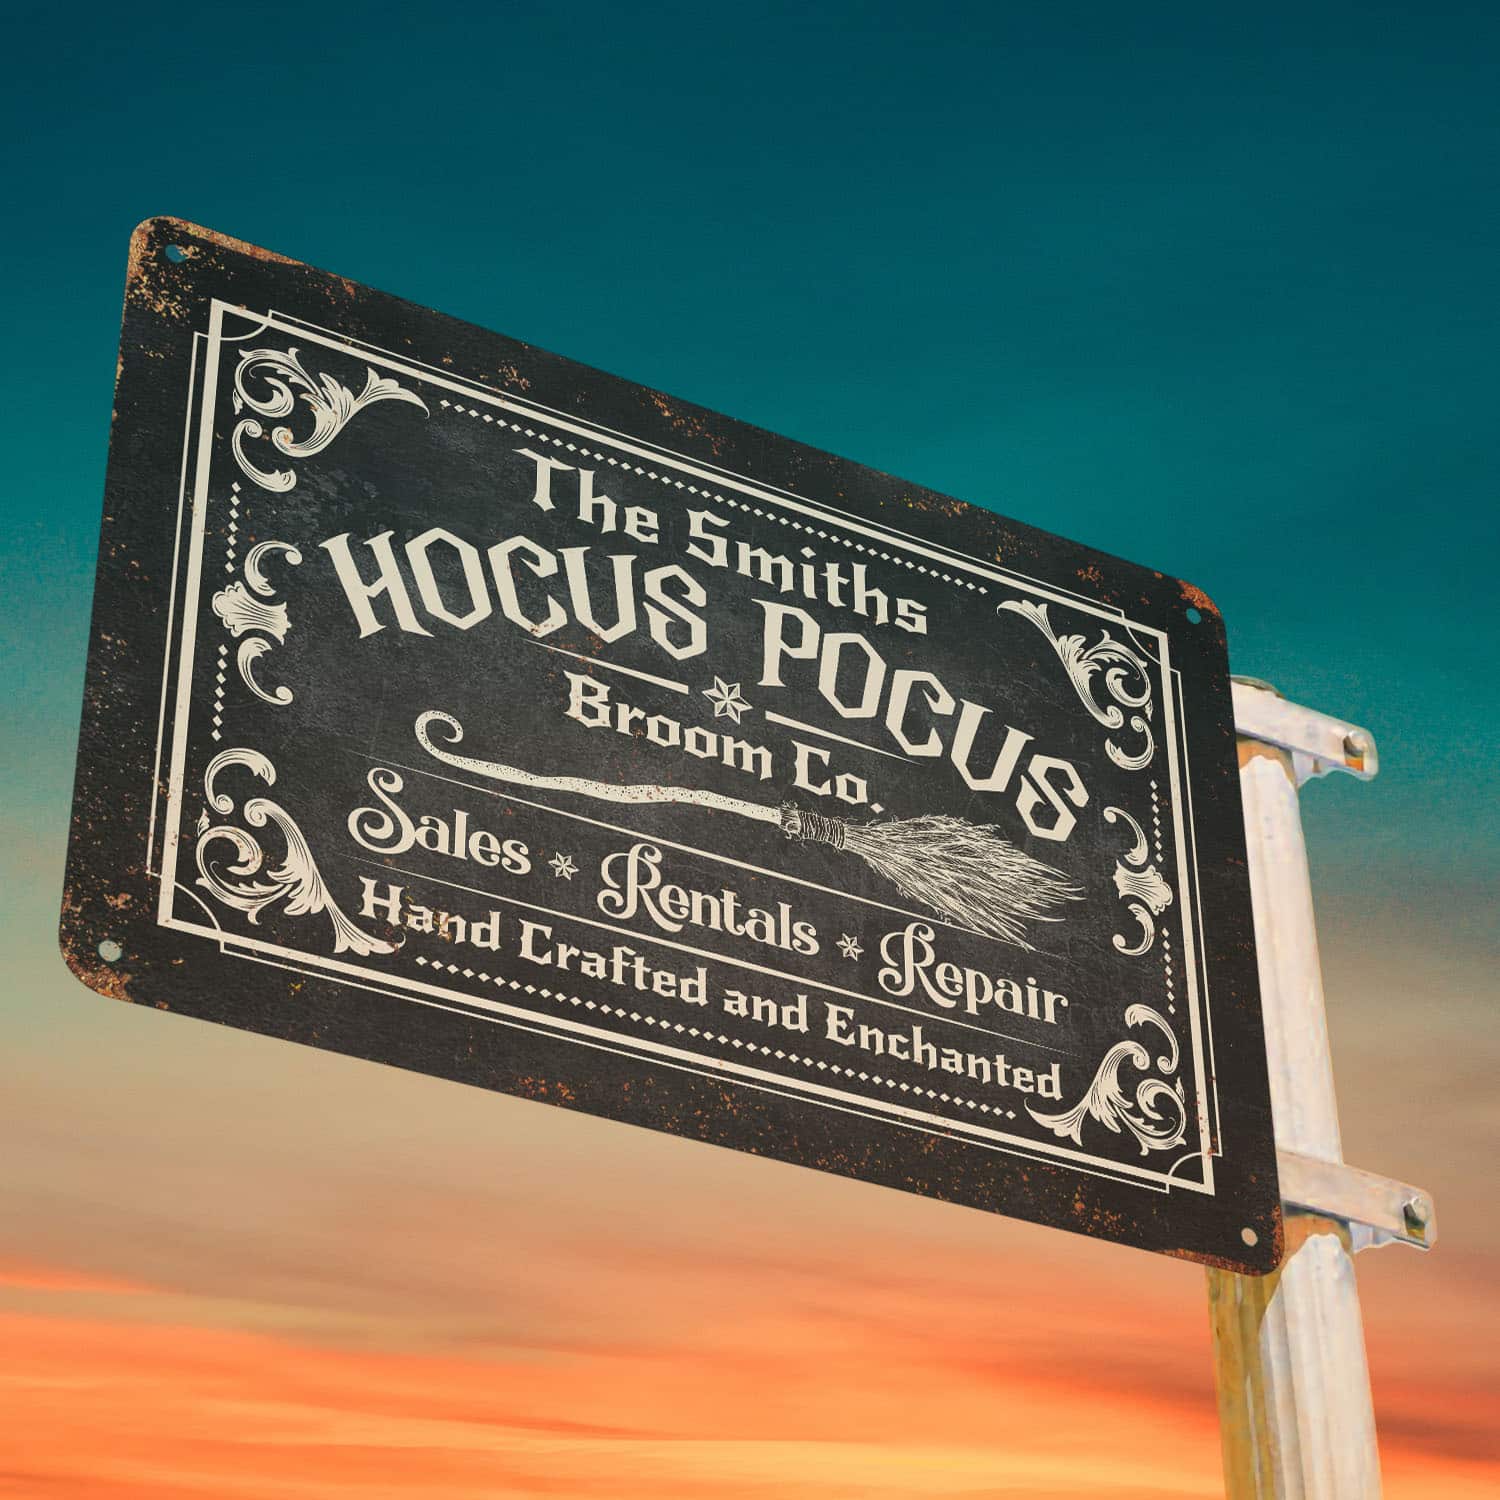 Personalized Hocus Pocus Broom Co Sales Rentals Repair Hand Crafted And Enchanted Outdoor Decorative Metal Sign